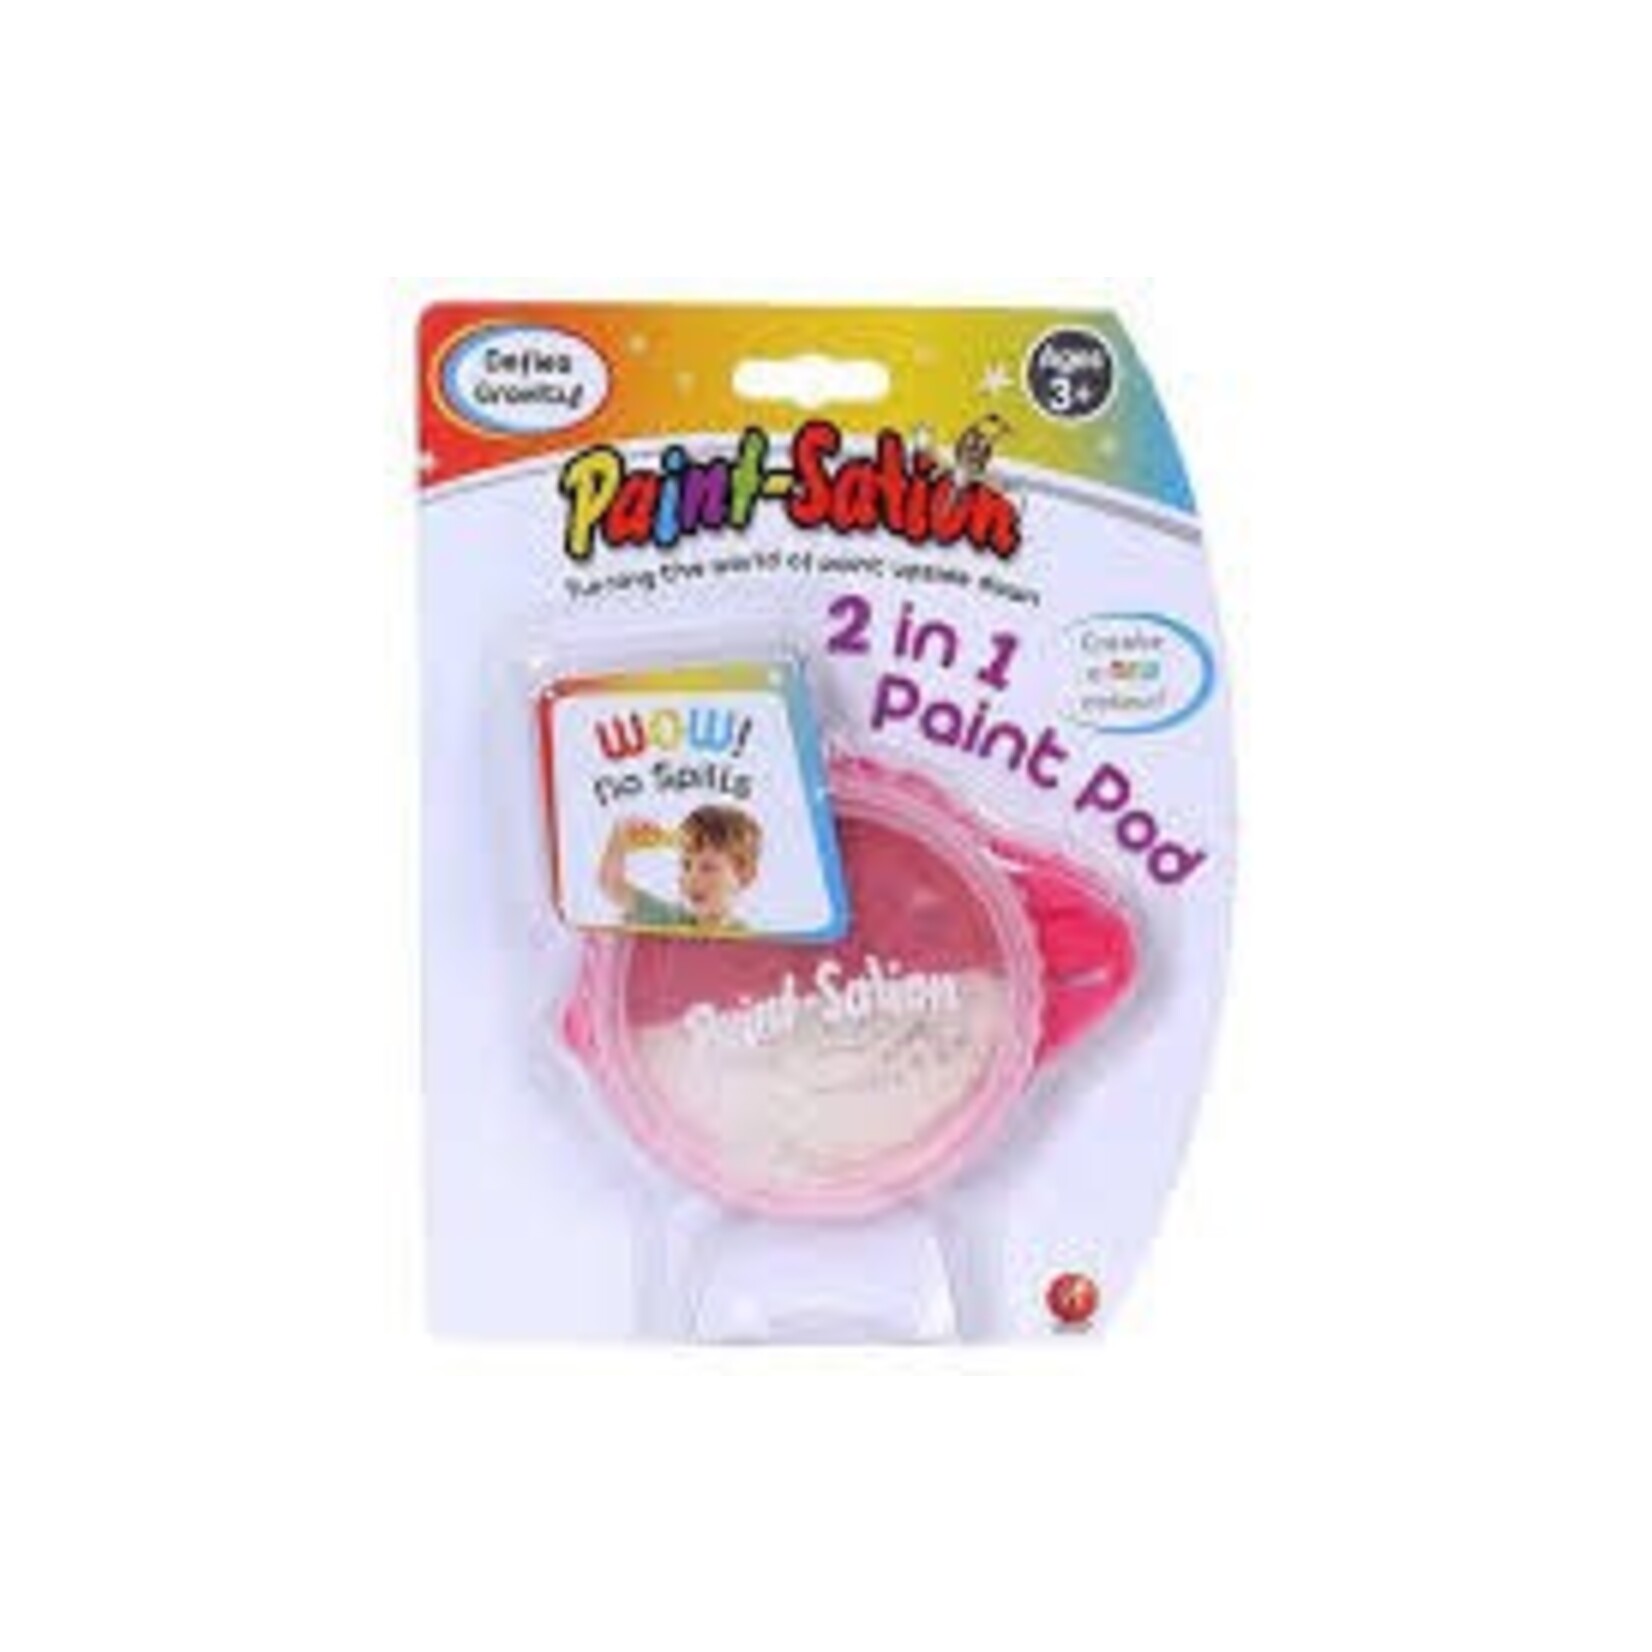 iToys Paint Station 2 In 1 Paint Pod